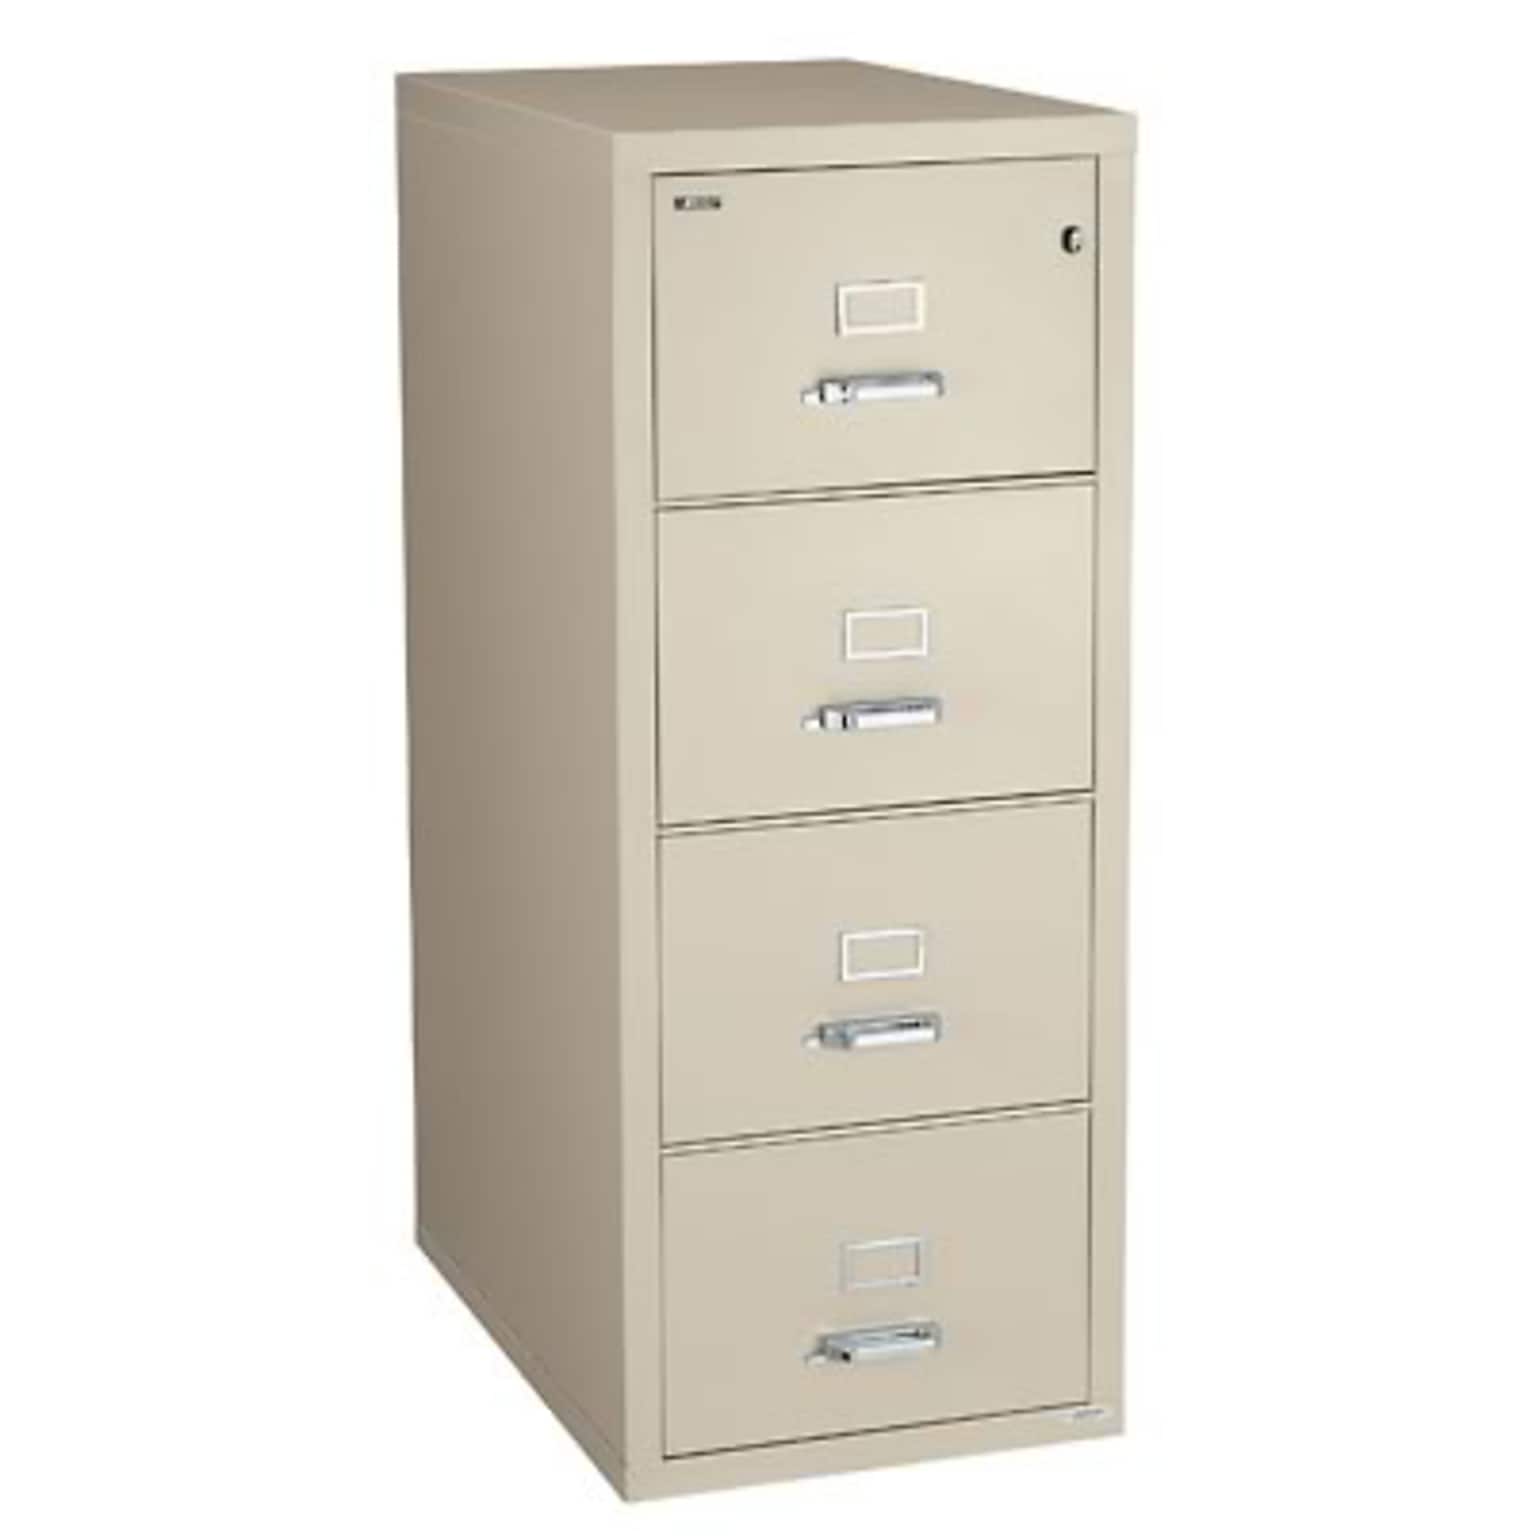 Quill Brand® 4-Drawer Fireproof Vertical File, Letter, Putty, 25D (Q254LTRPY)